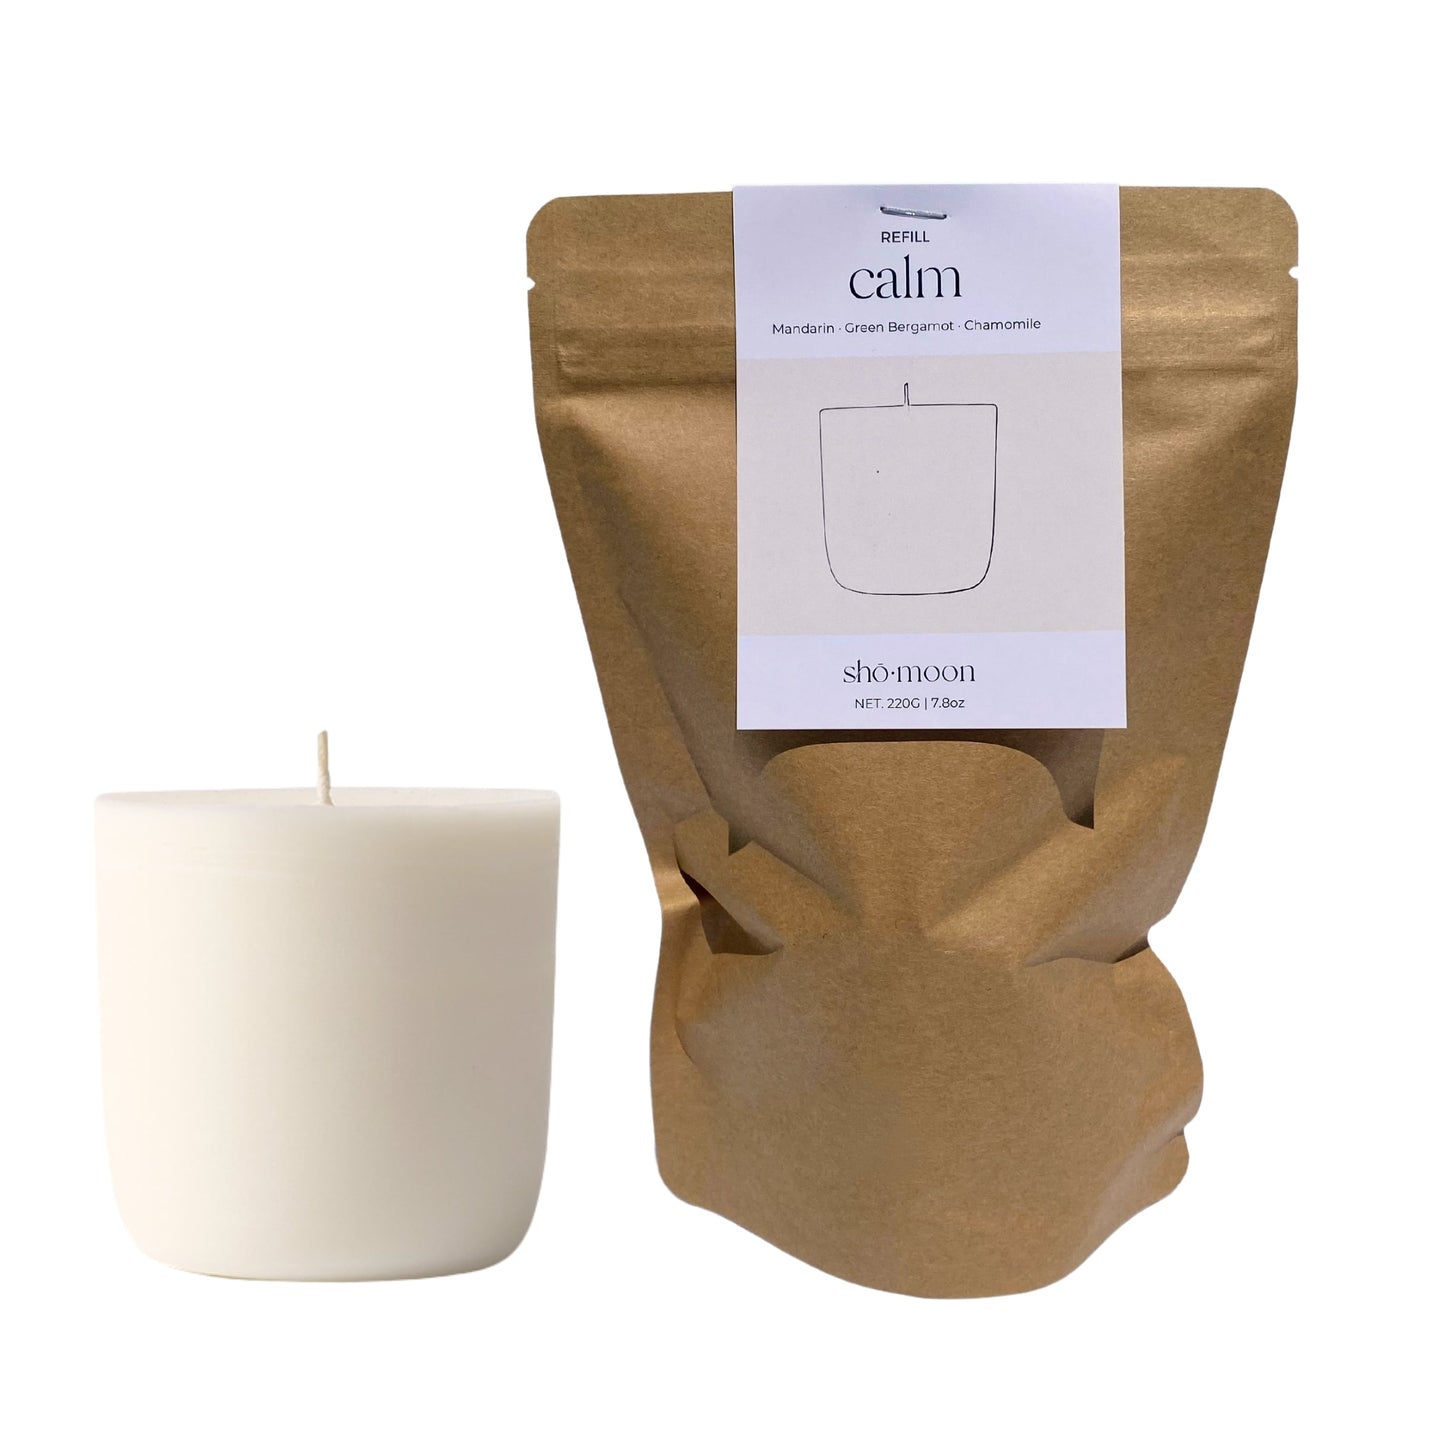 Shō-moon Calm Meditation Candle Refill with pure essentials oils and clean burning and natural wax and packaging